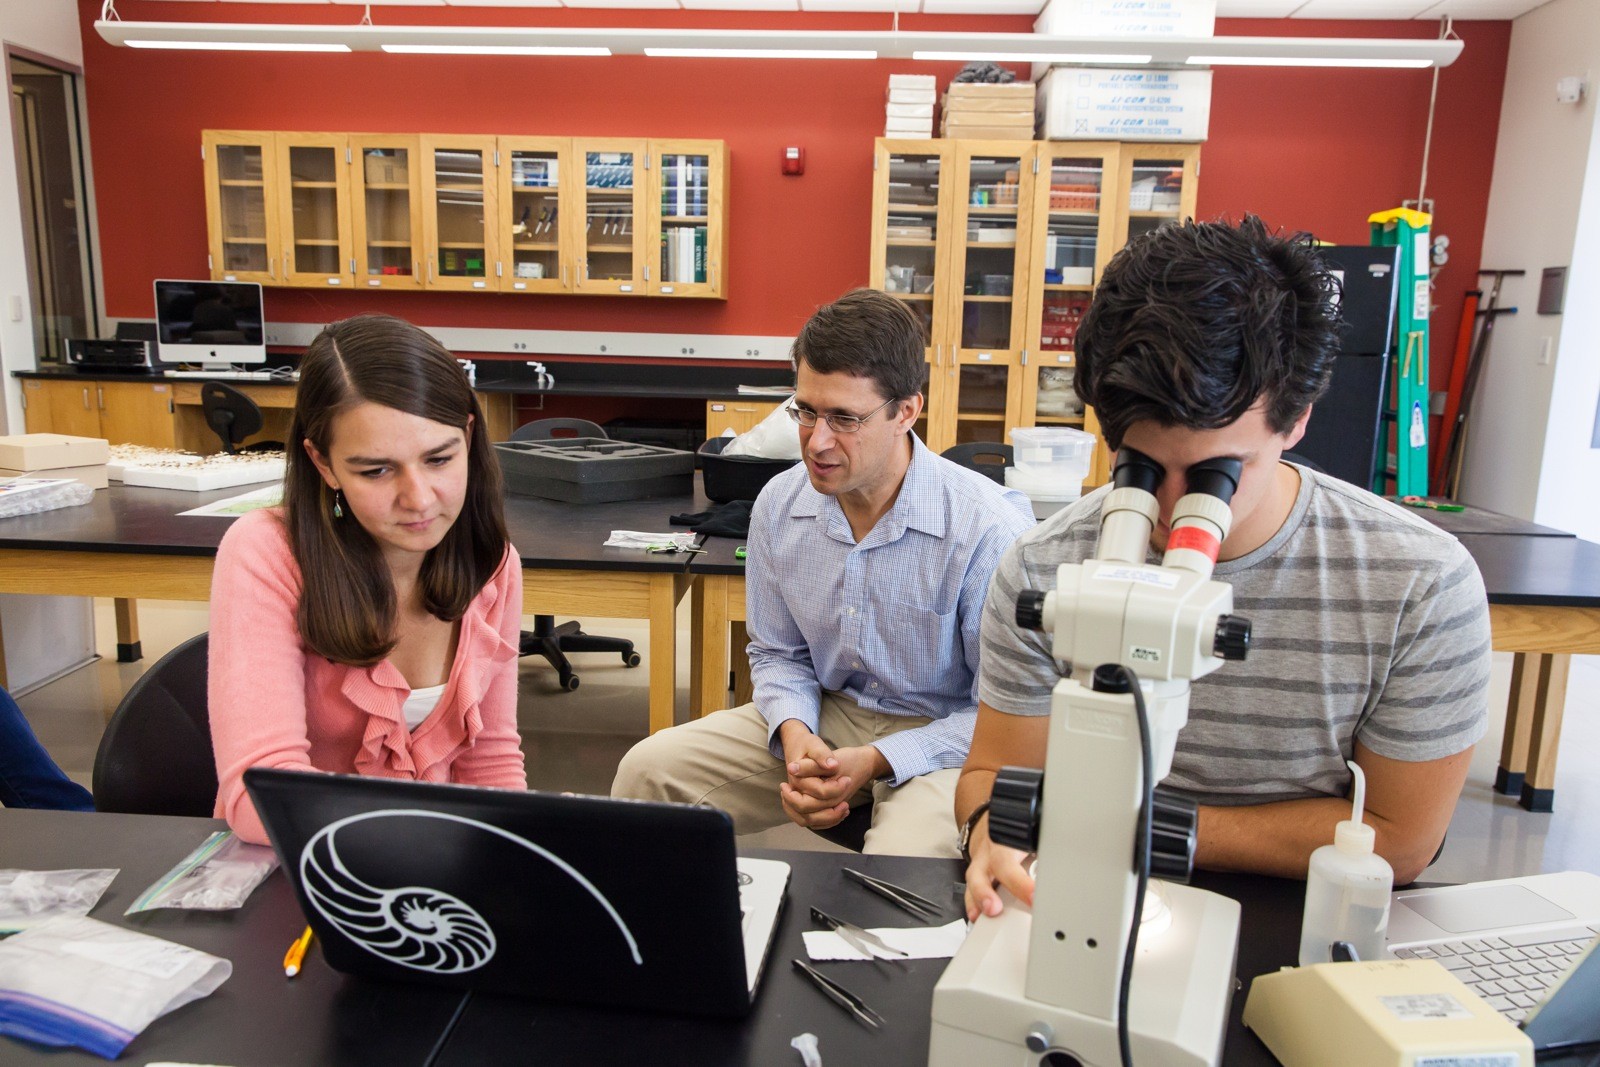 David Lubertazzi (center) helps Geanina Fripp and Scott Summers identify ant specimens that the students collected in Haiti.